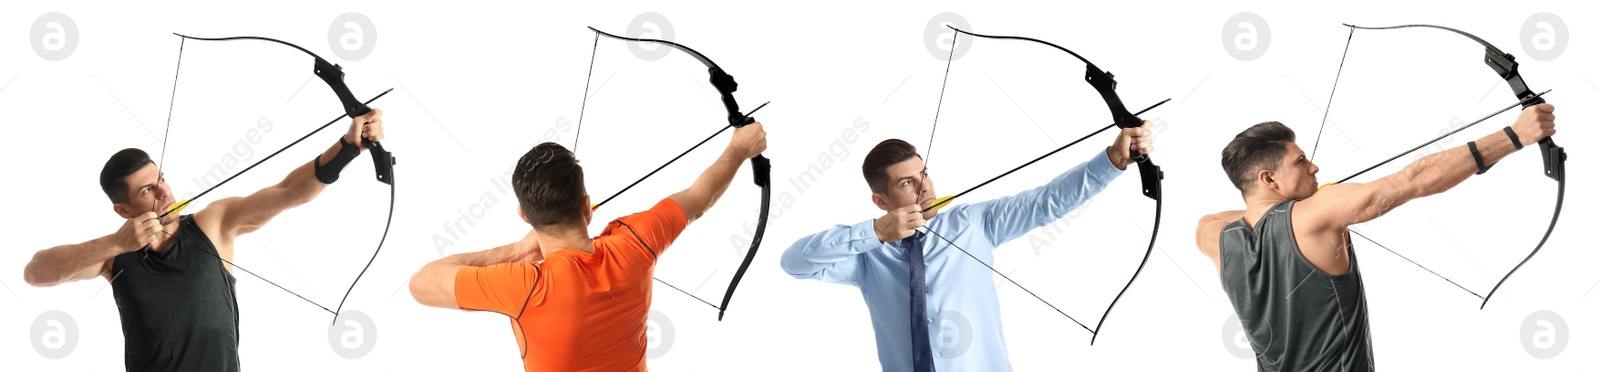 Image of Man practicing archery on white background, collage. Banner design